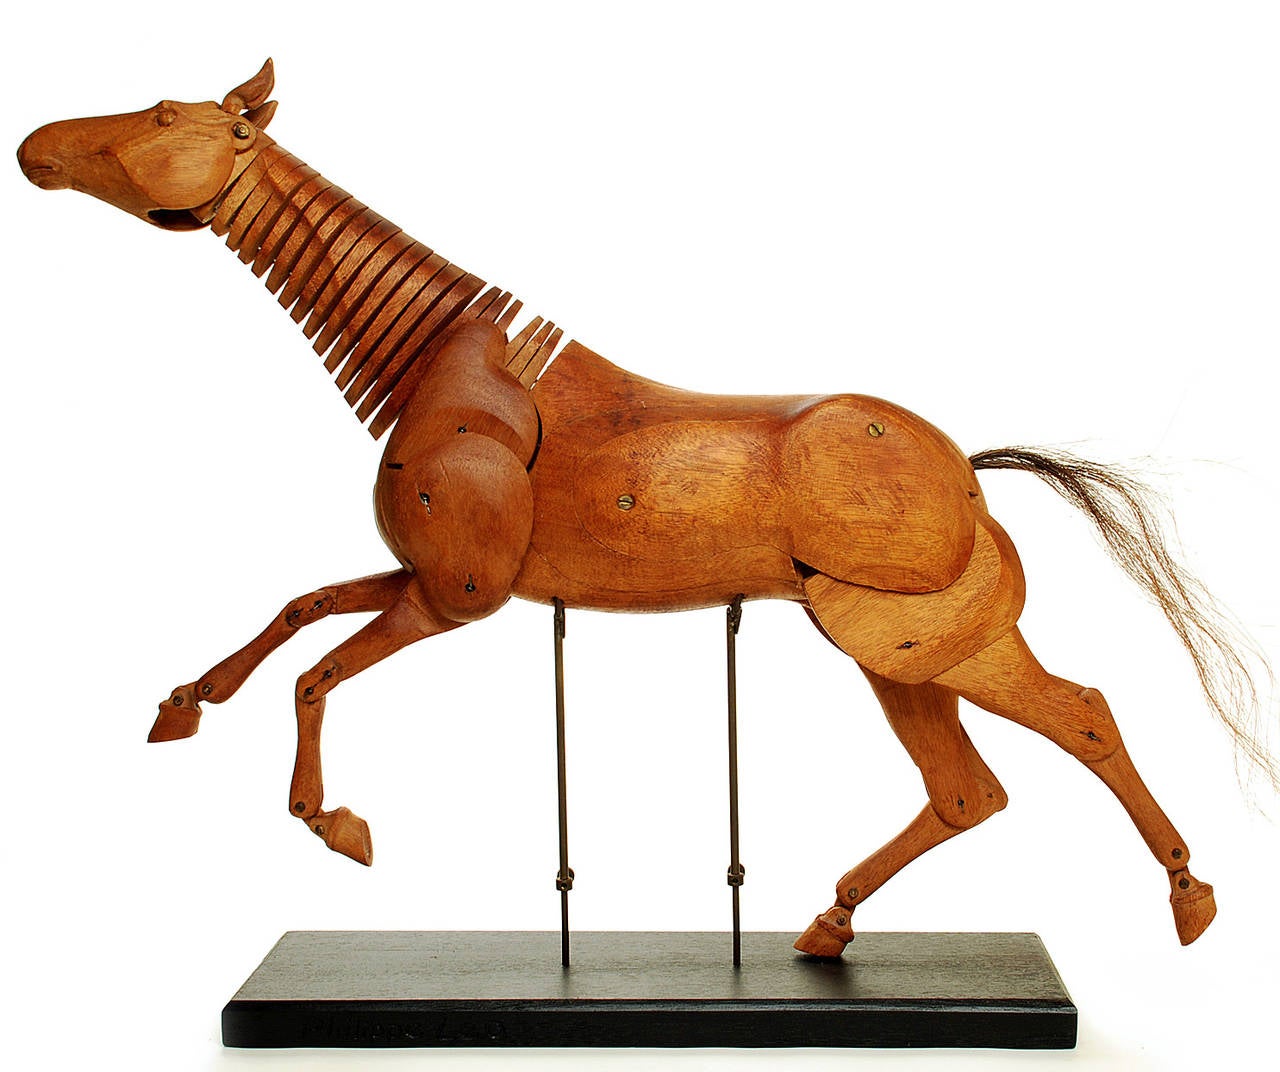 European Fully Articulated Artist's Model of a Horse, Signed